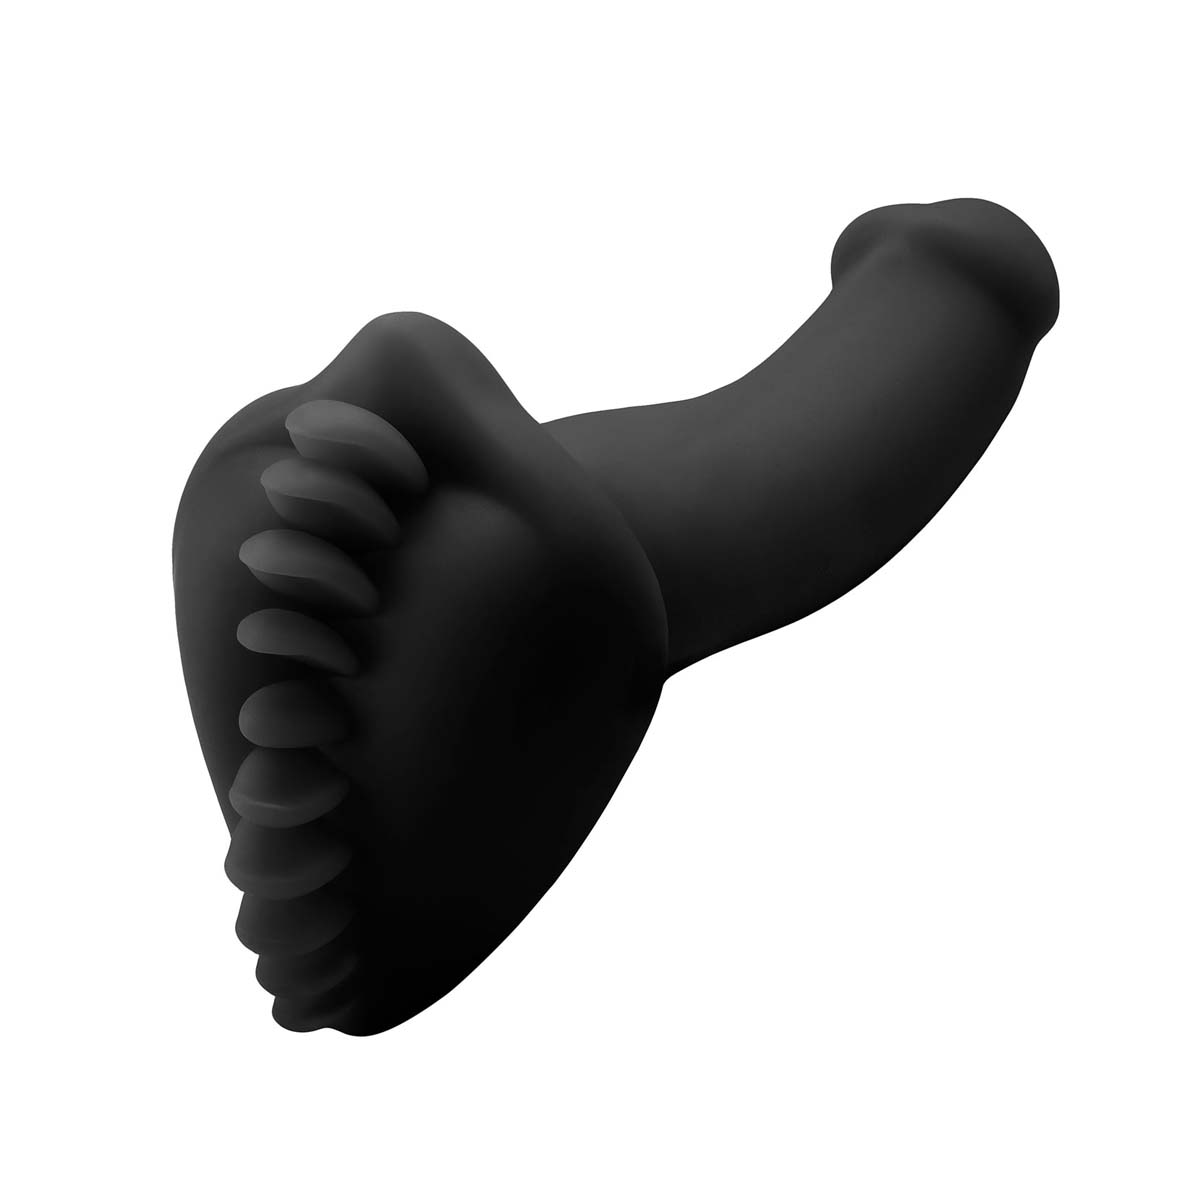 Black silicone dildo stimulating cushion with soft tips along the centre over a black silicone dildo Nudie Co